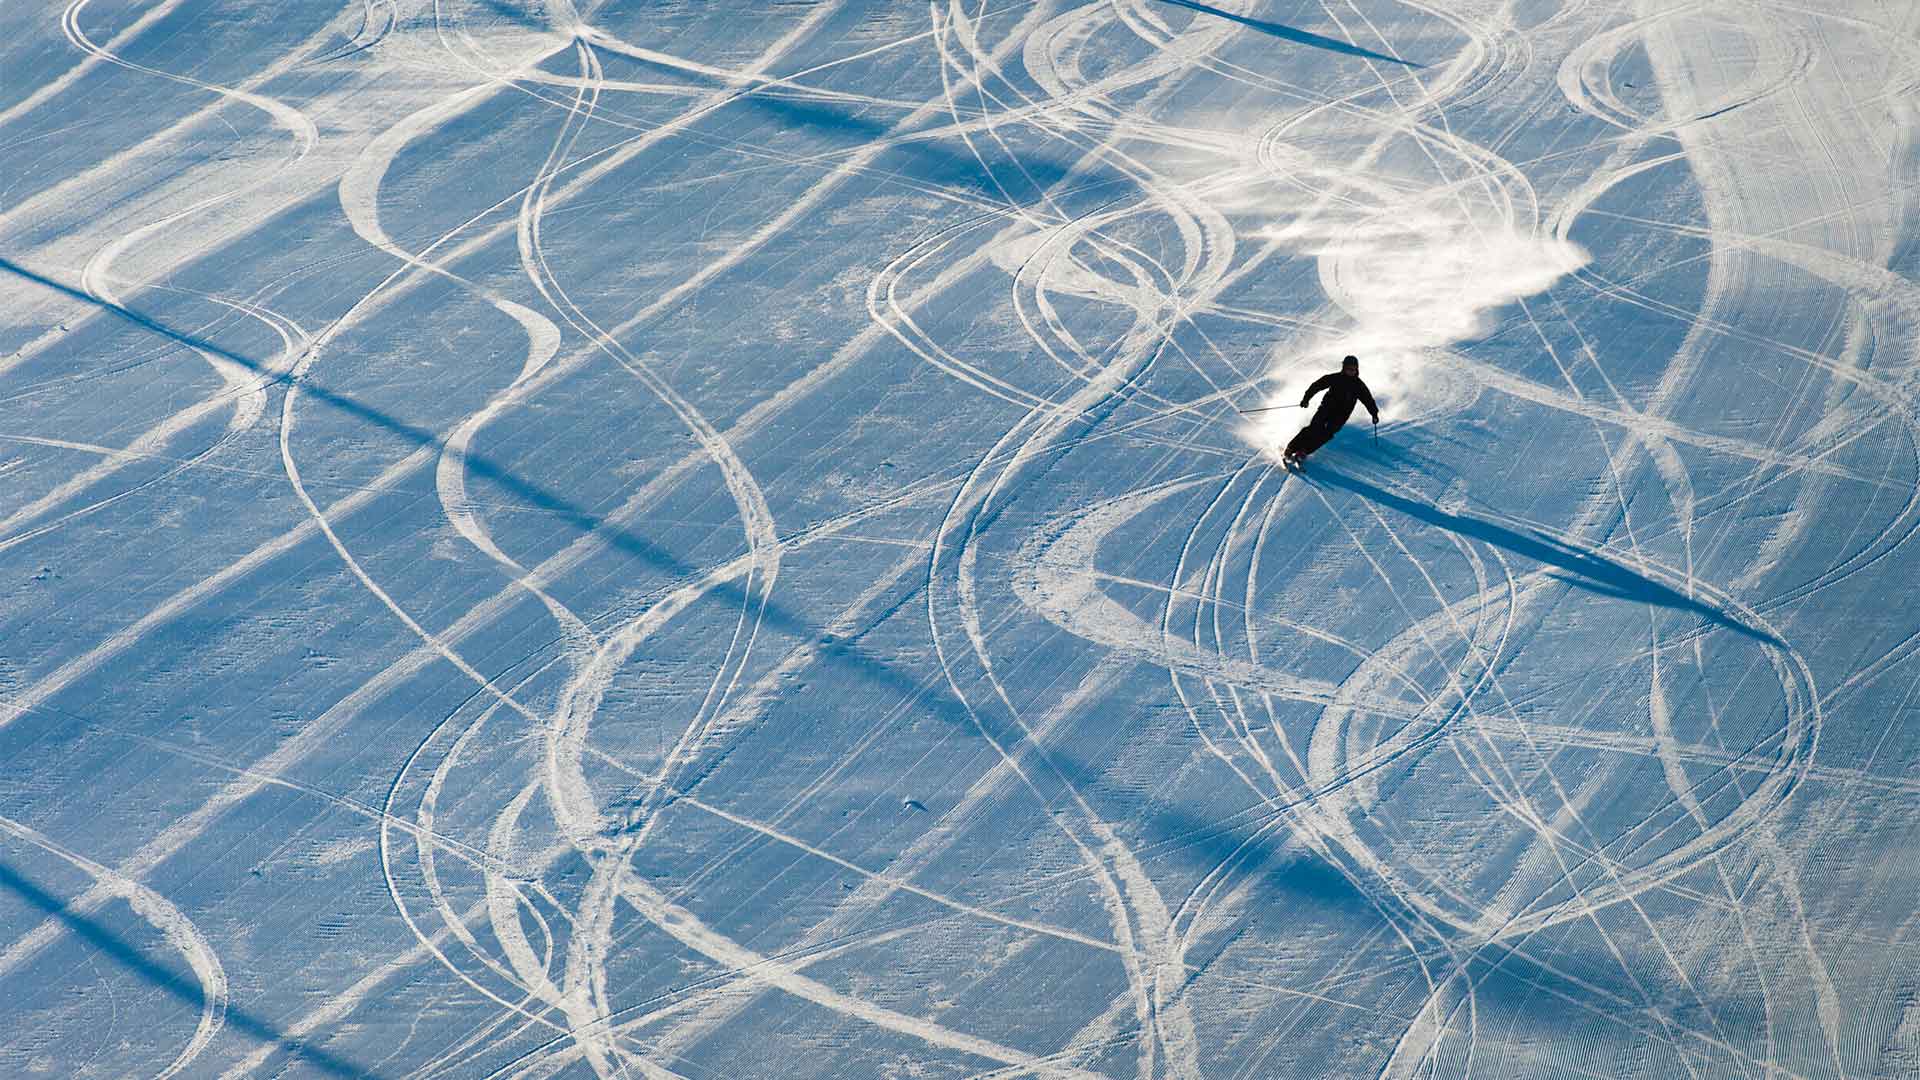 Patterns drawn in the snow